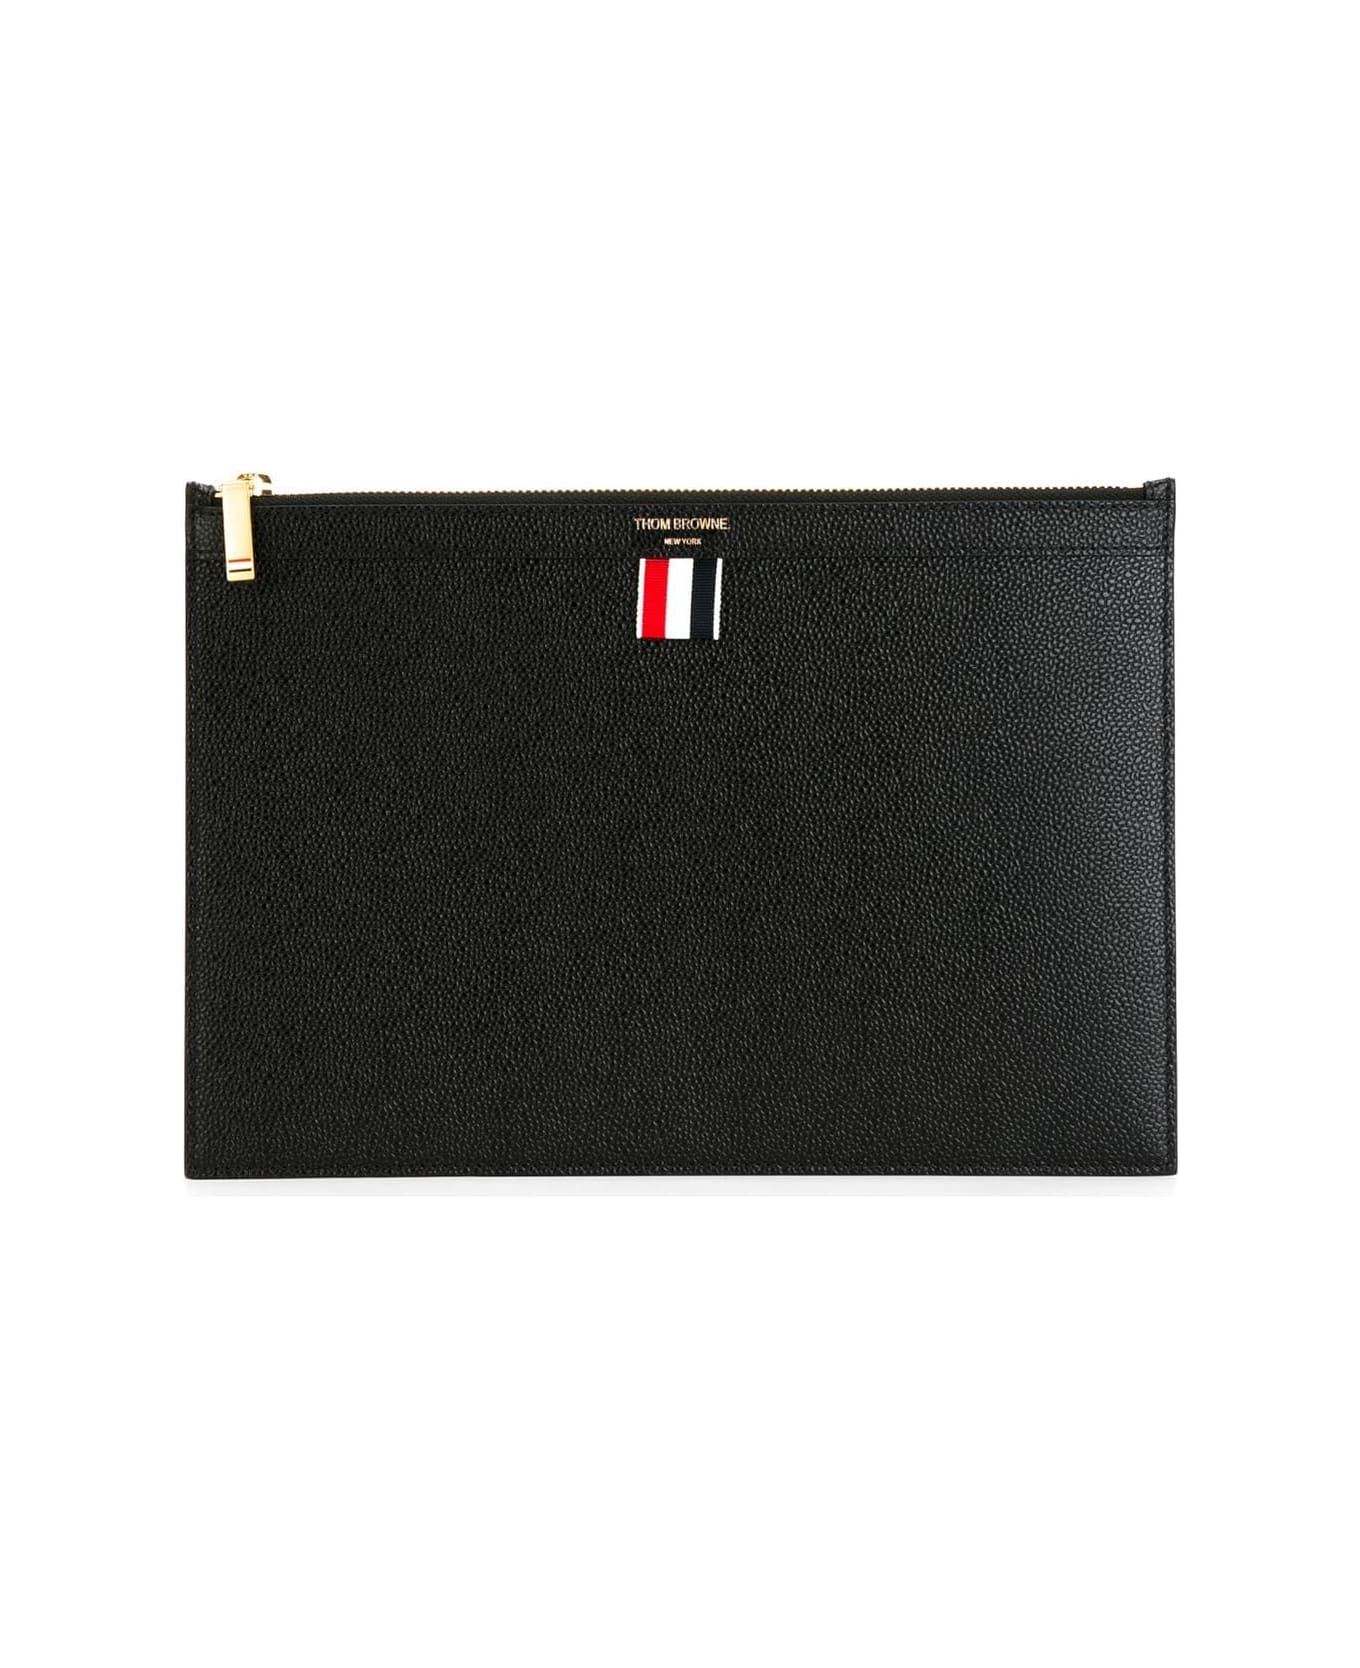 Thom Browne Small Document Holder In Pebble Grain Leather - Black